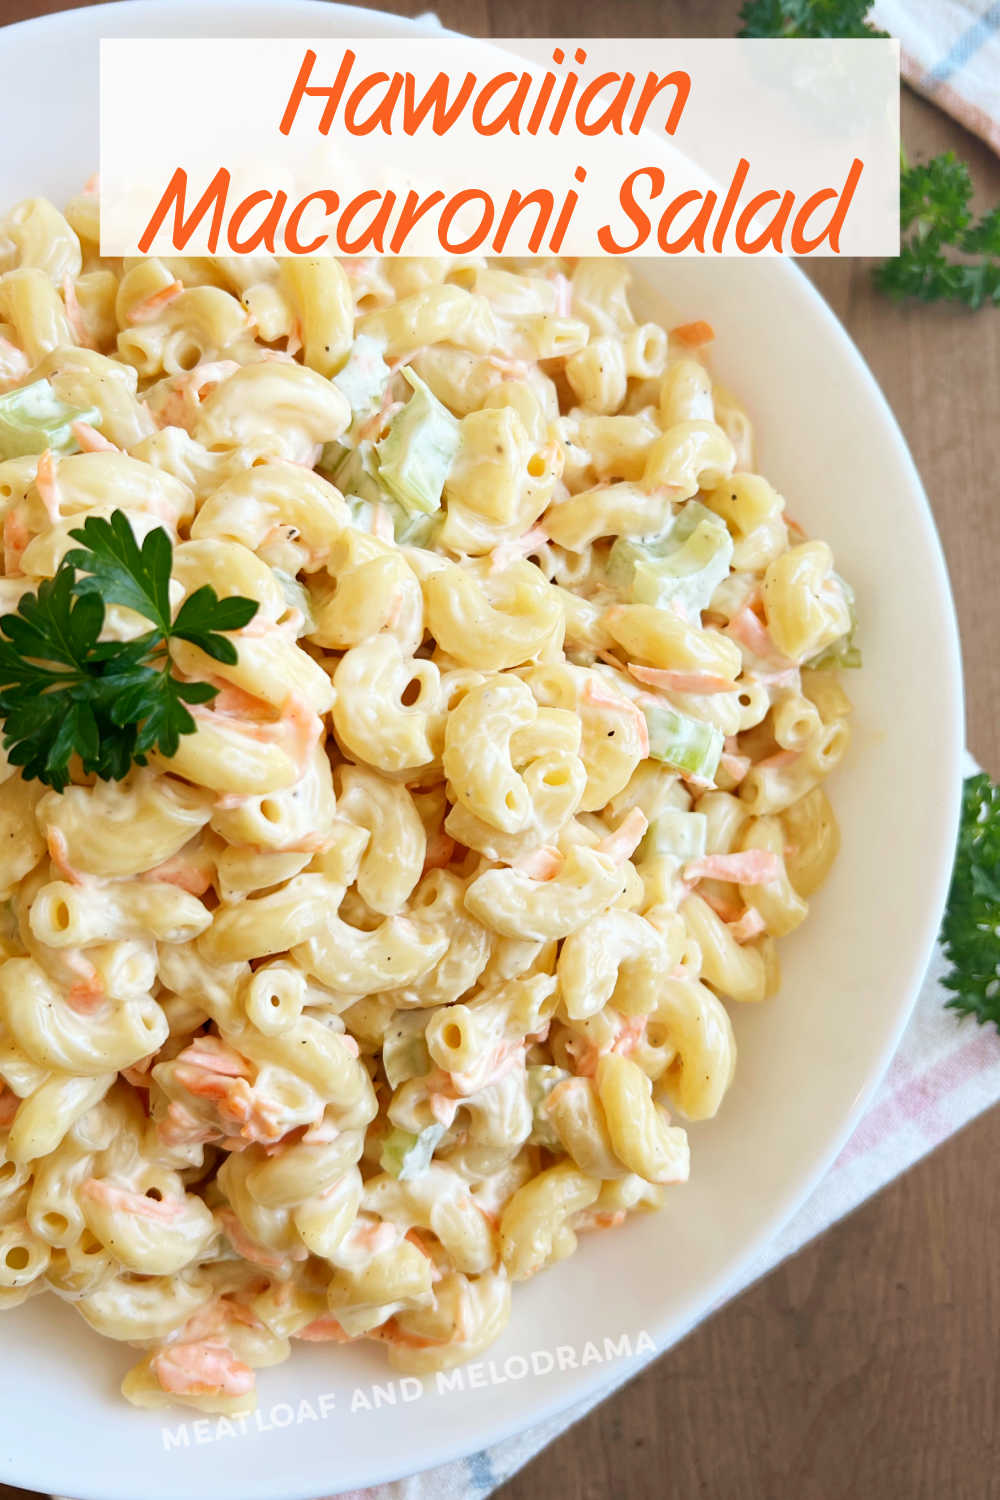 Hawaiian Macaroni Salad (Mac Salad) is made with a handful of simple ingredients and a super creamy dressing. This easy recipe is the perfect side dish for summer cookouts! via @meamel